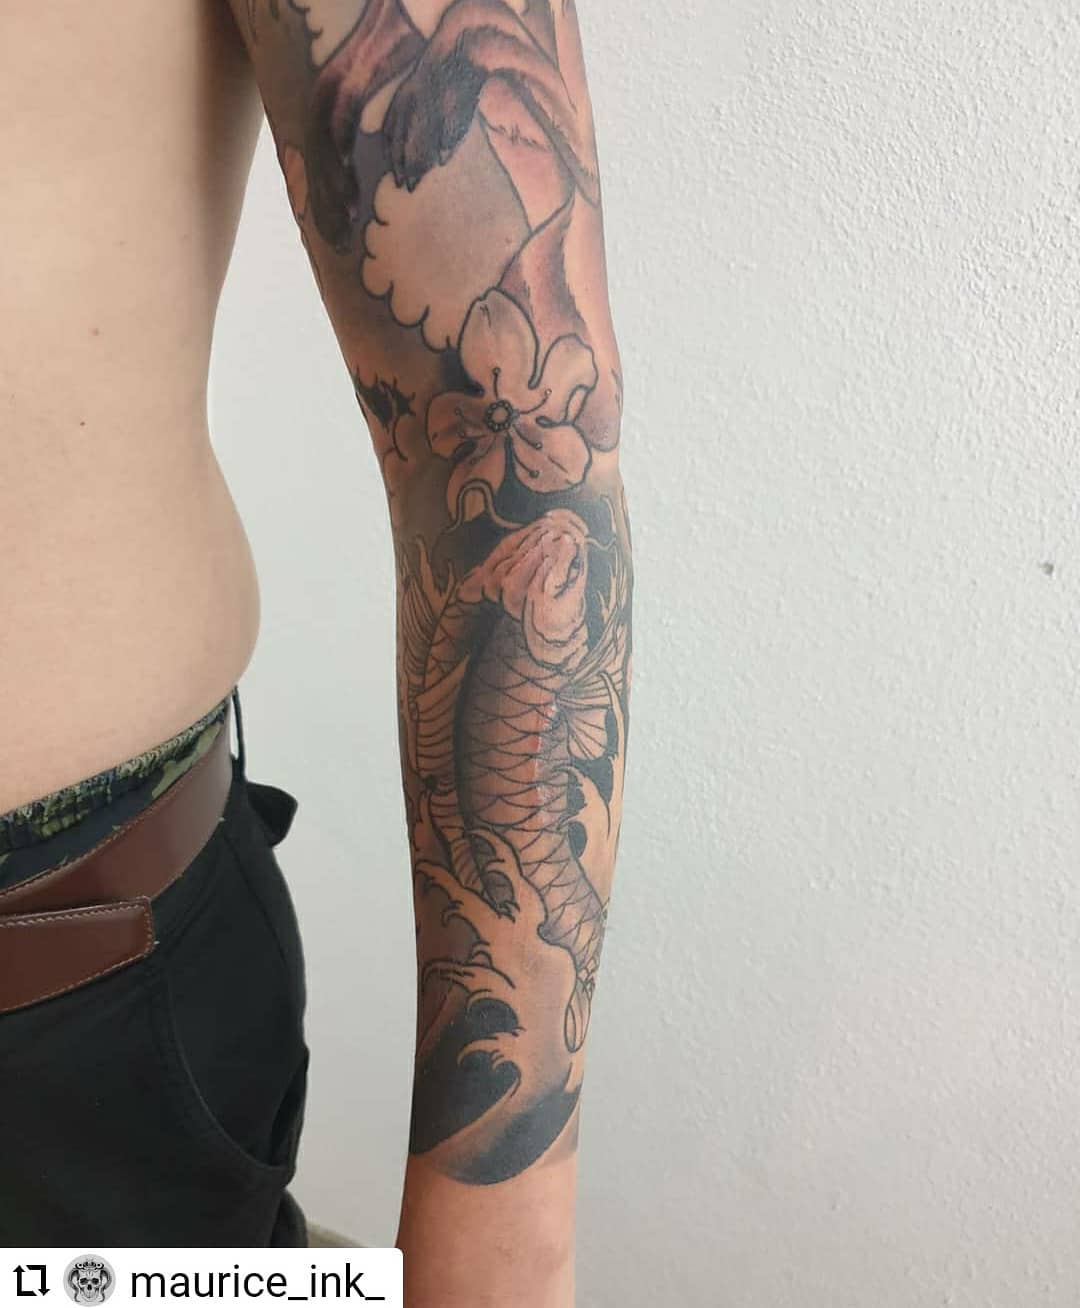 Neu von @maurice_ink_
...
Done with this koi and fox sleeve. A hanya mask will b